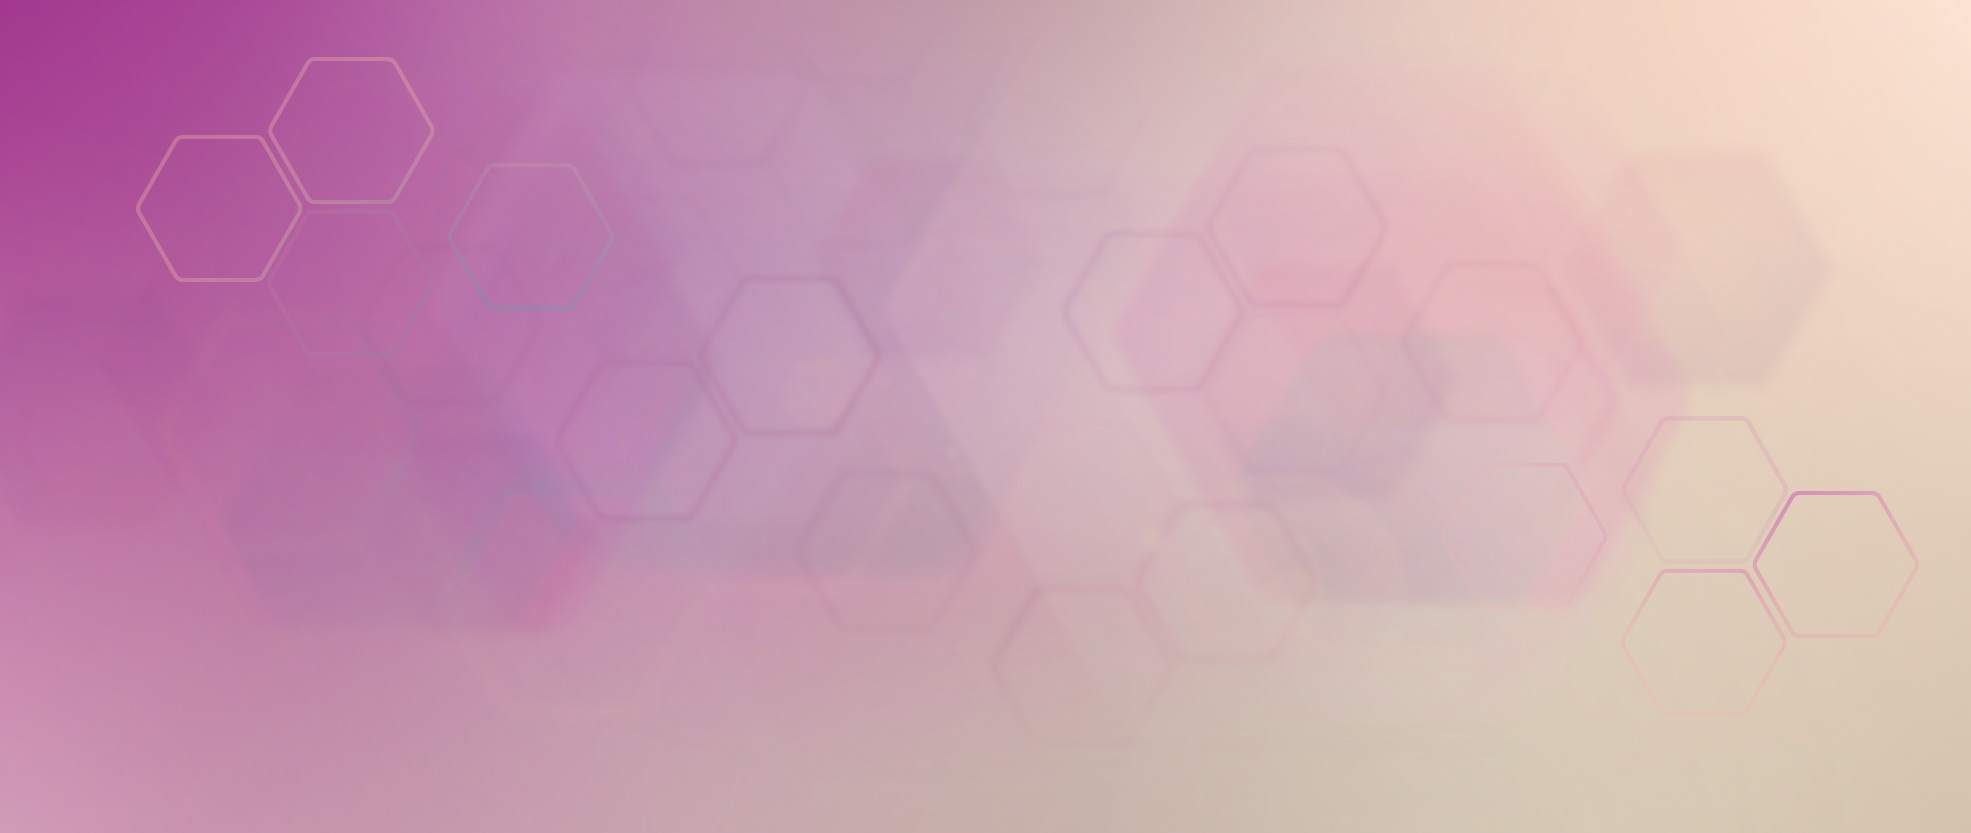 lilac background with a honeycomb pattern